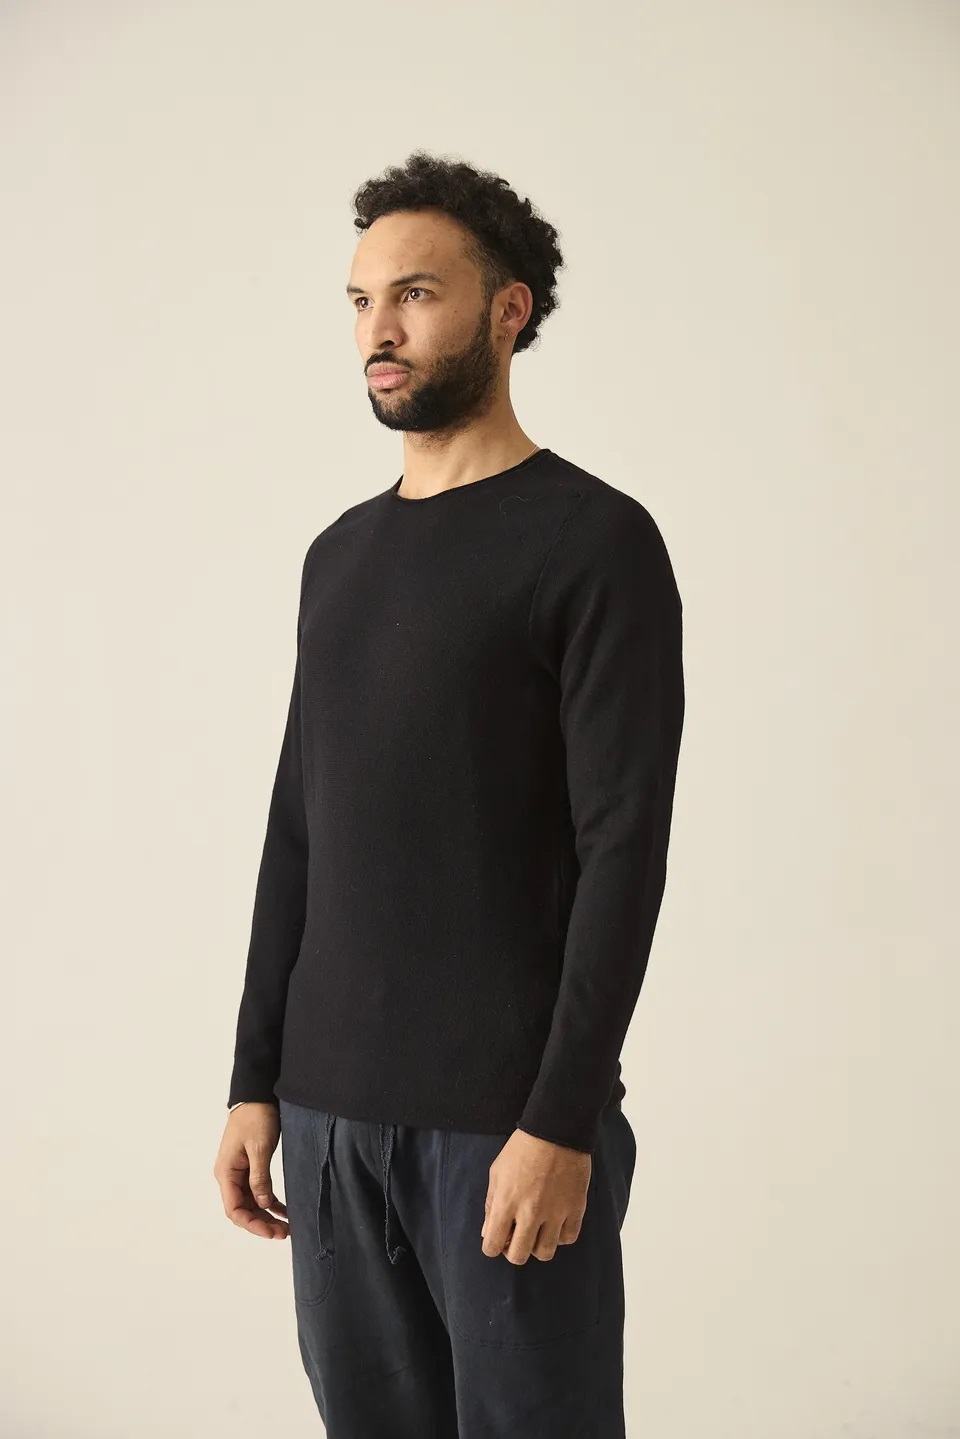 HANNIBAL. Knit Pullover Nevio in Charcoal